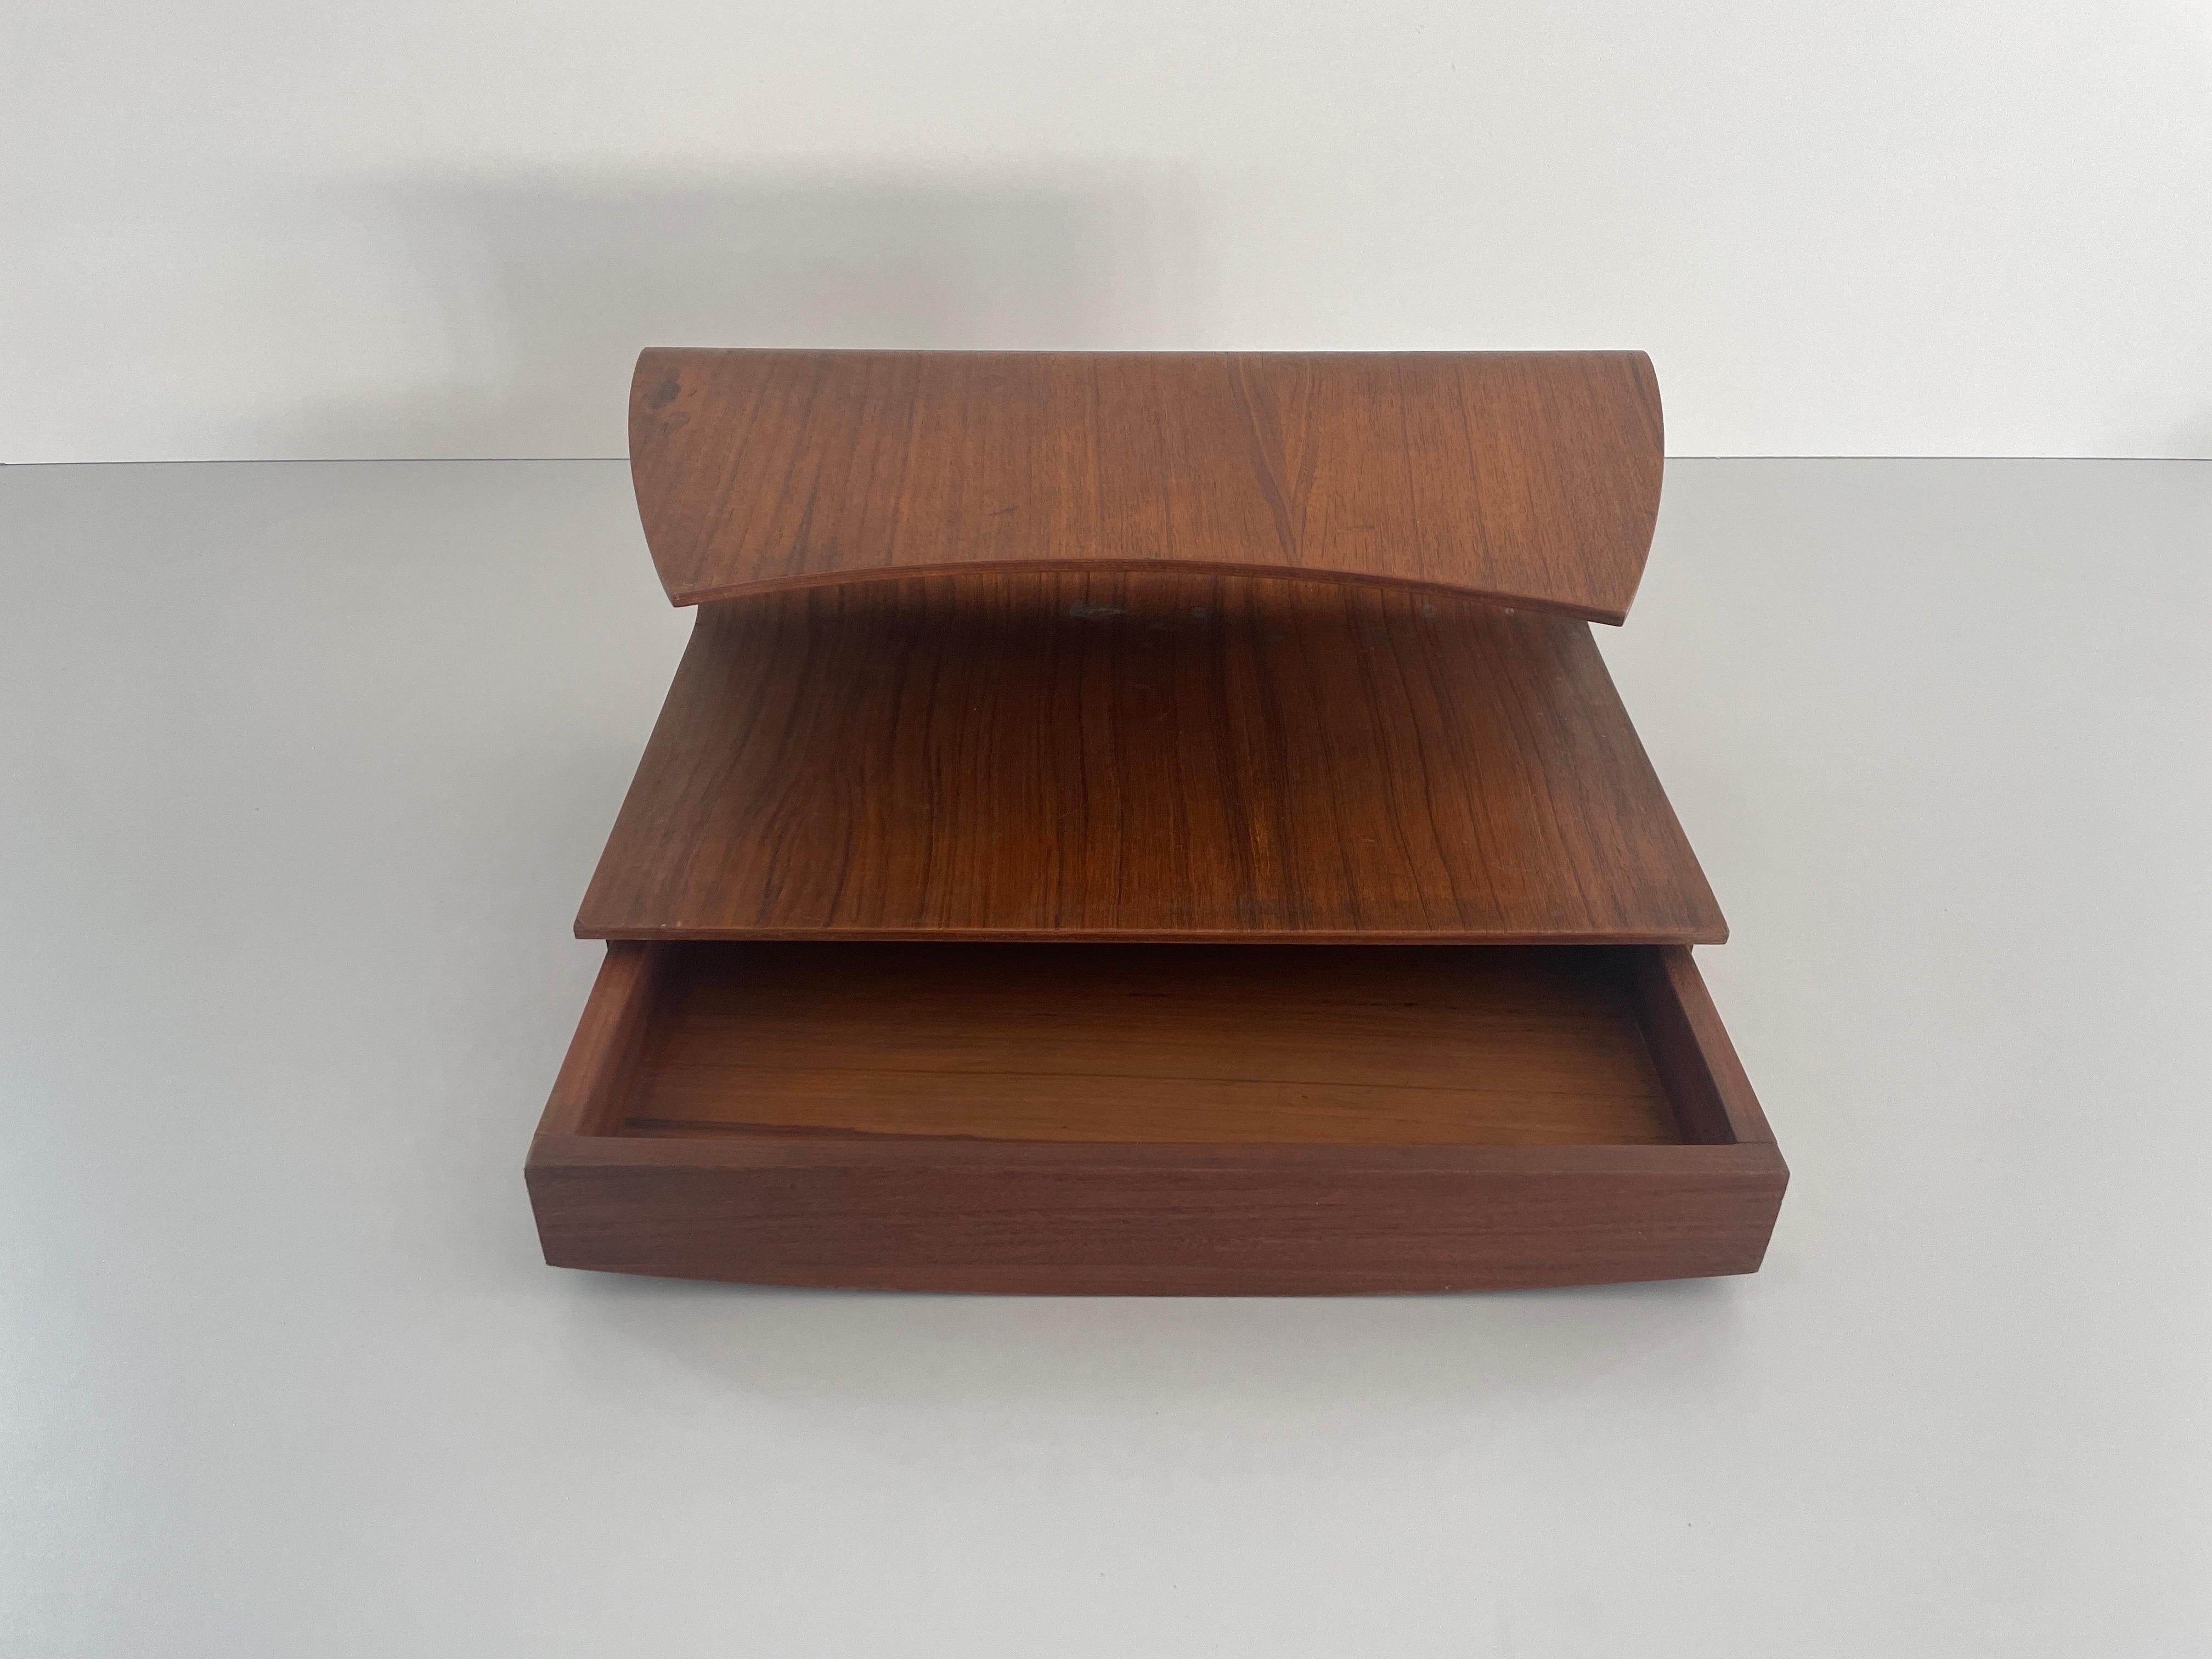 Italian Wood Floating Shelf with Drawer, 1960s, Italy

No damage, no crack.
Wear consistent with age and use.

Measurements: 
Width: 45 cm
Depth: 28 cm
Height: 22 cm